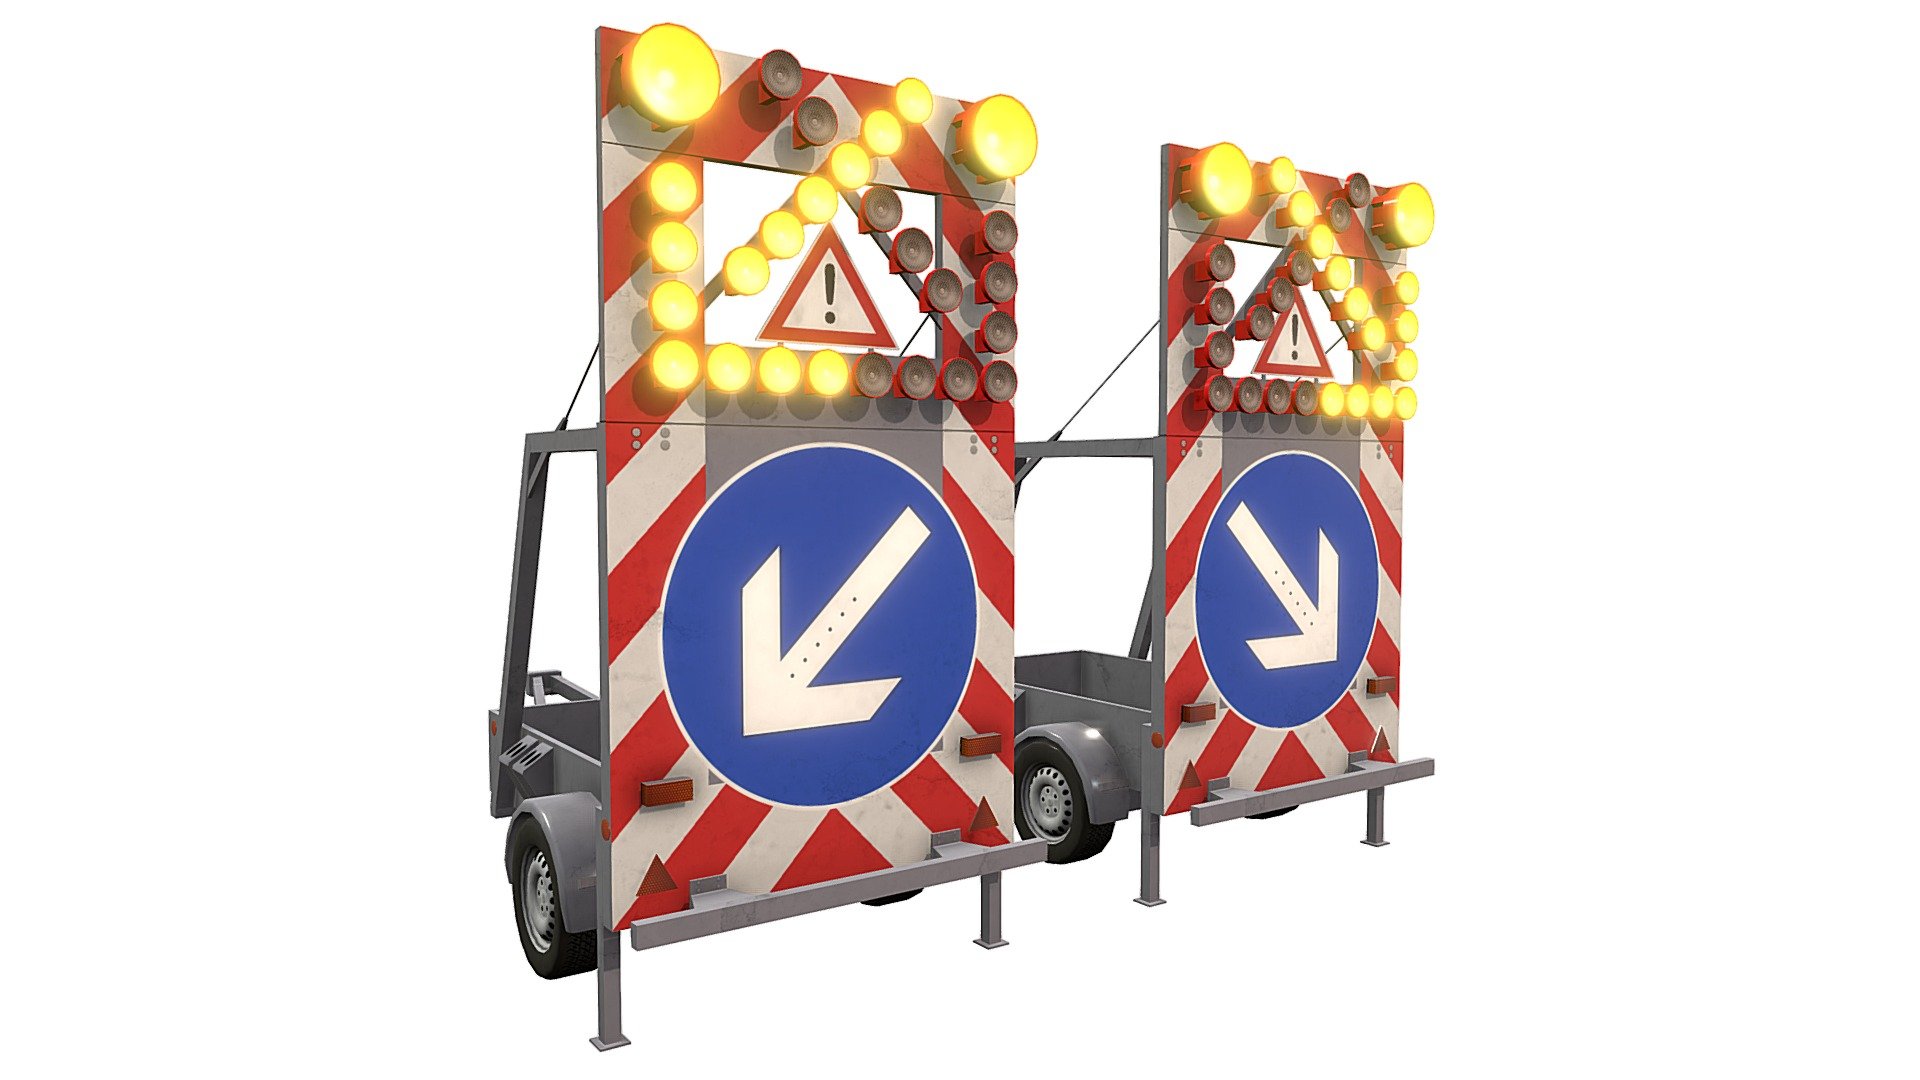 Low poly traffic safety trailers

Detailed enough for 3rd and 1st person and cameras

Perfectly useable for road construction and road seperation in your game maps

Asset is PBR specular workflow ready including own PBR texture sets for each of both parts

PBR textures in native 4K down to 2K: 6 x albedo, 3 x specular, 3 x gloss, 3 x ao, 3 x normal dx, 3 x normal gl, 3 x bump, 3 x emmission

Included are 2 x AO options for the trailers, with and without floor occlusion

Complete triangle count per trailer is just 7436 tris and 4244 verts
Made to real world scale in meters: length ca. 4.4 m, ca height 4 m

Additional file contains Fbx, Obj-Mtl, Dae, 3ds, Fbx, Max ( native 3dsMax2020) and all neccessary textures

Notice! This is the same asset as that with nigthttime setup
 - Traffic Safety Trailers (Daytime - Lights On) - Buy Royalty Free 3D model by RealtimeModels 3d model